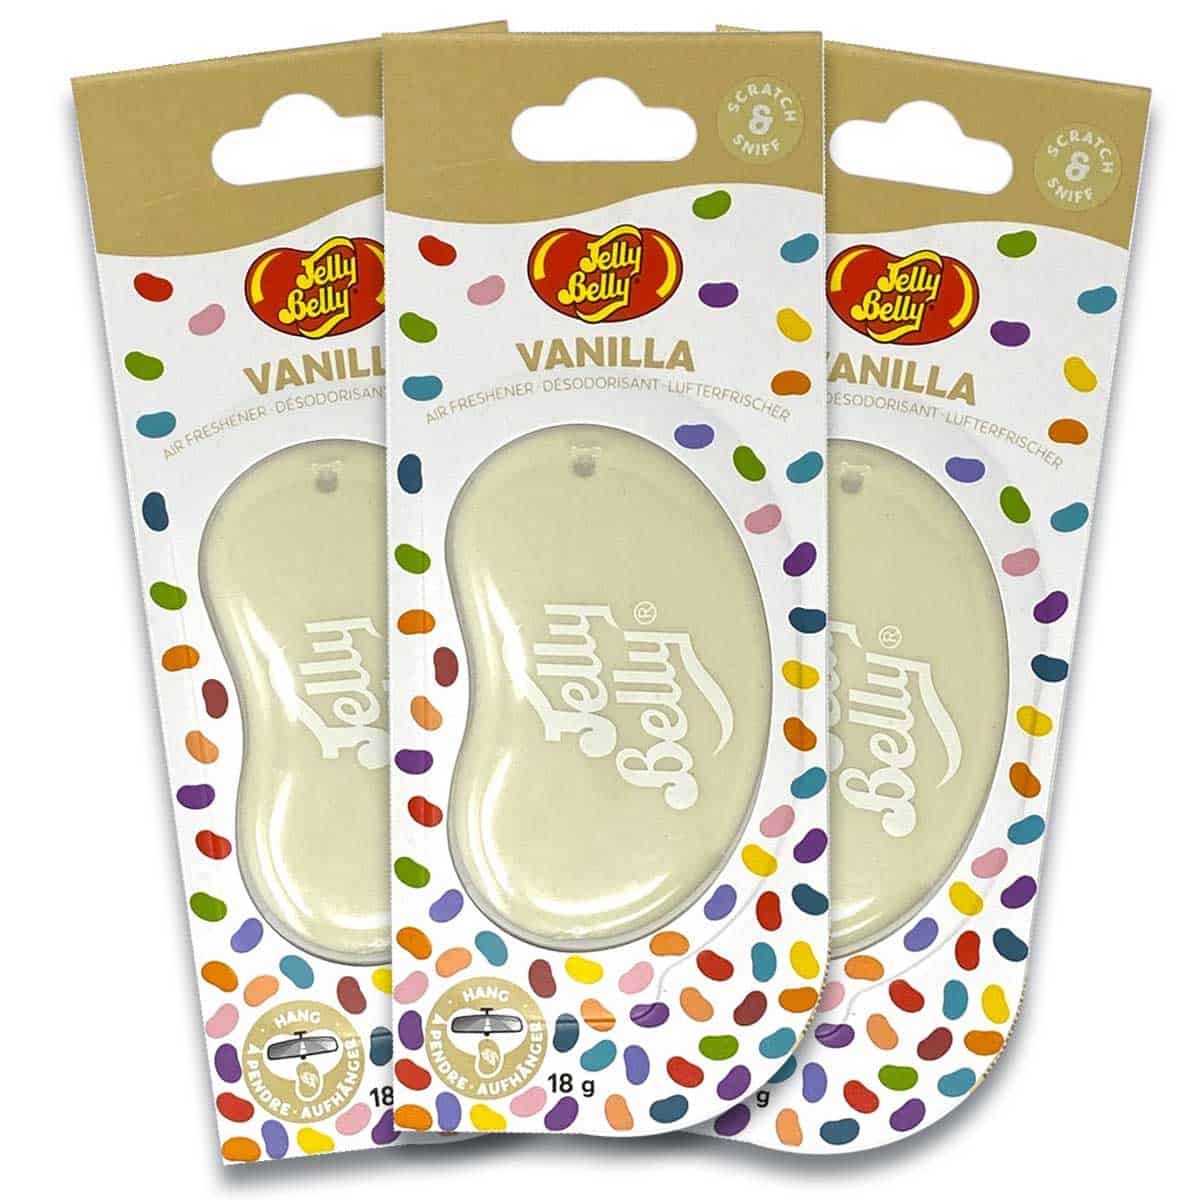 Whether you're looking to enhance the ambiance of your car, home, or office, the Jelly Belly 3D Vanilla Air Freshener is the ideal choice. Its hanging gel design ensures convenient placement wherever you desire, without taking up valuable space.